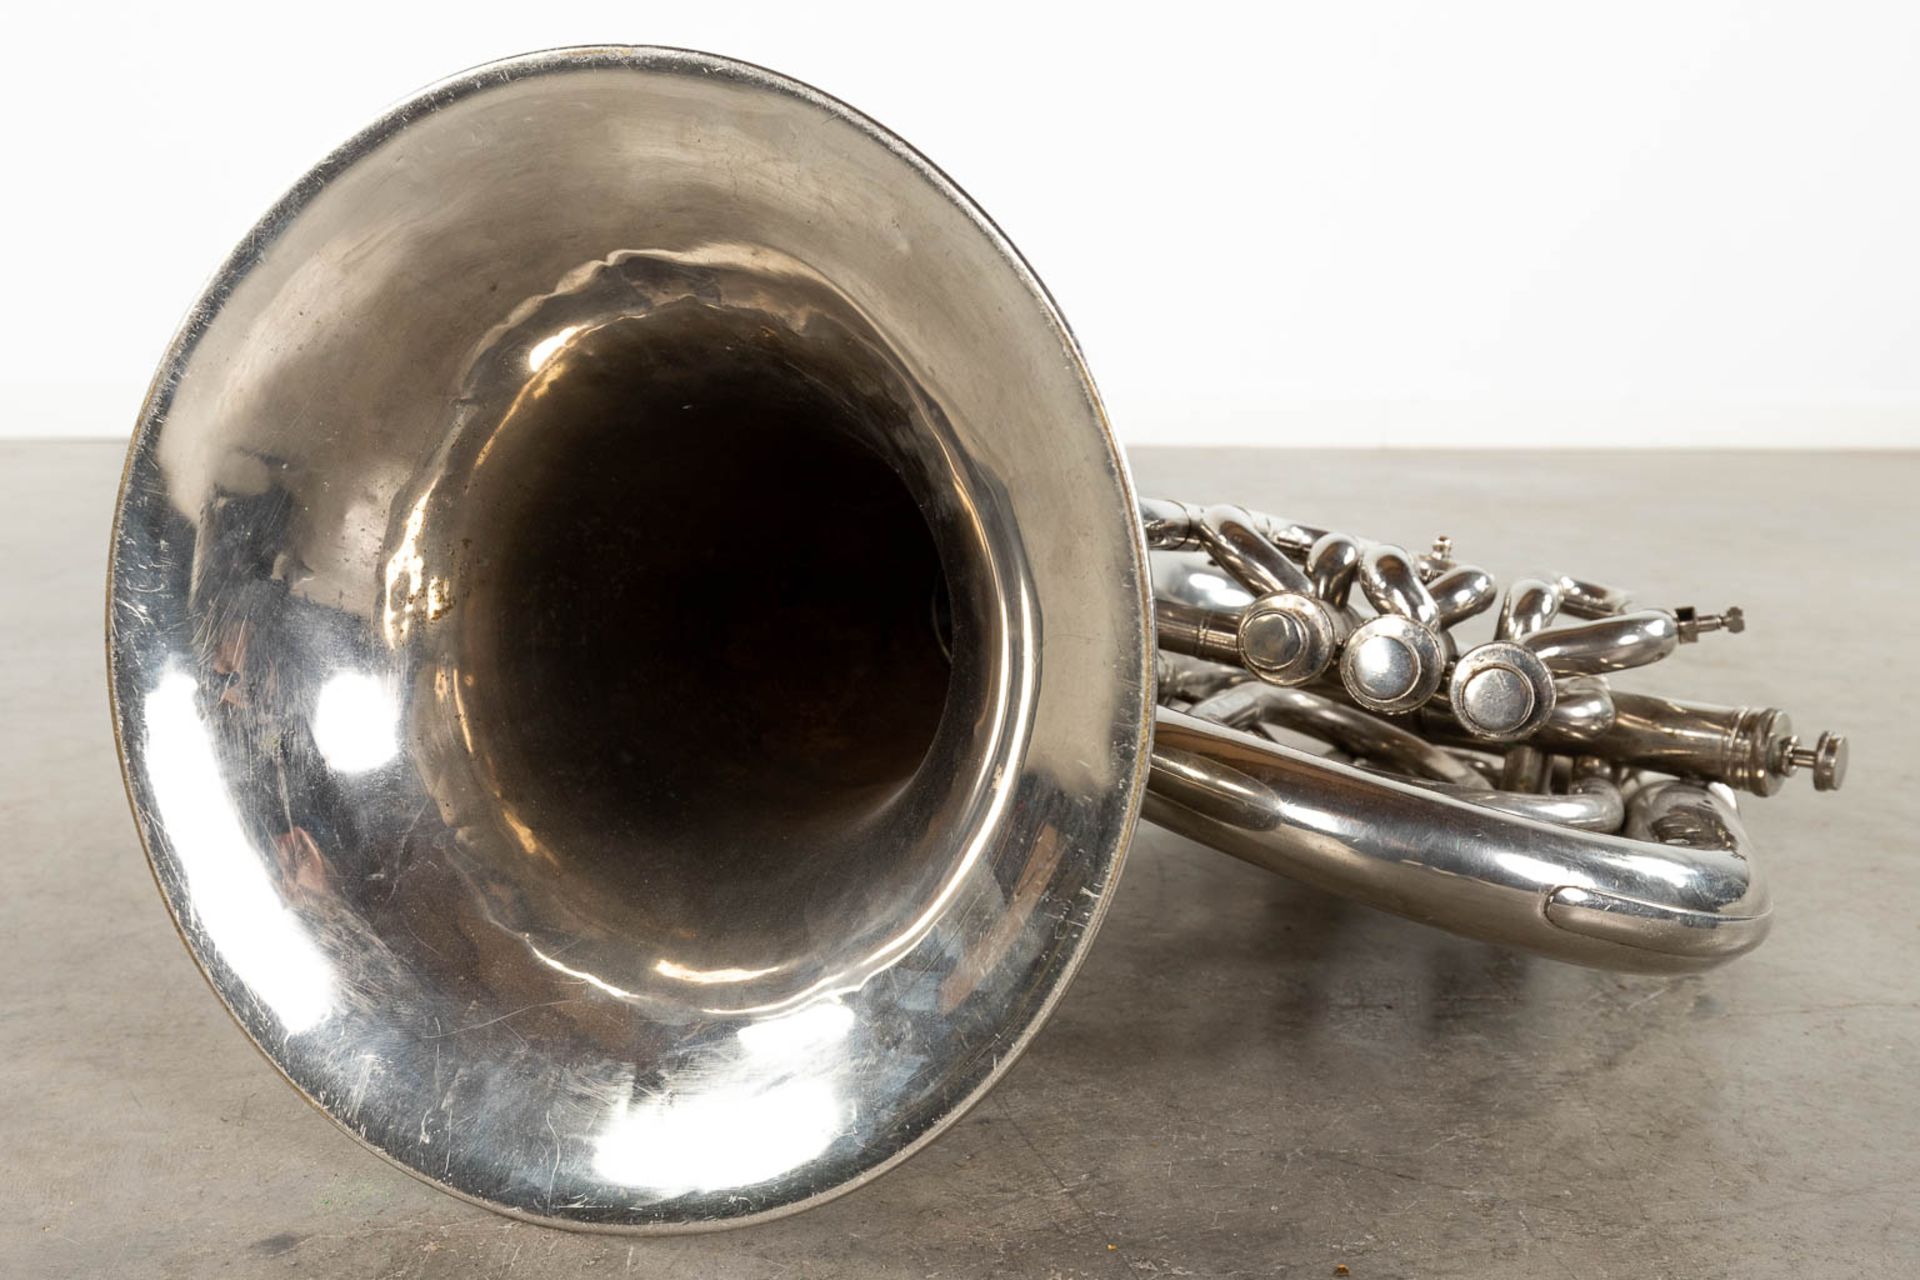 A Brass Tuba, Musical Instrument. The Netherlands, 20th C. (D:47 x W:65 x H:33 cm) - Image 10 of 12